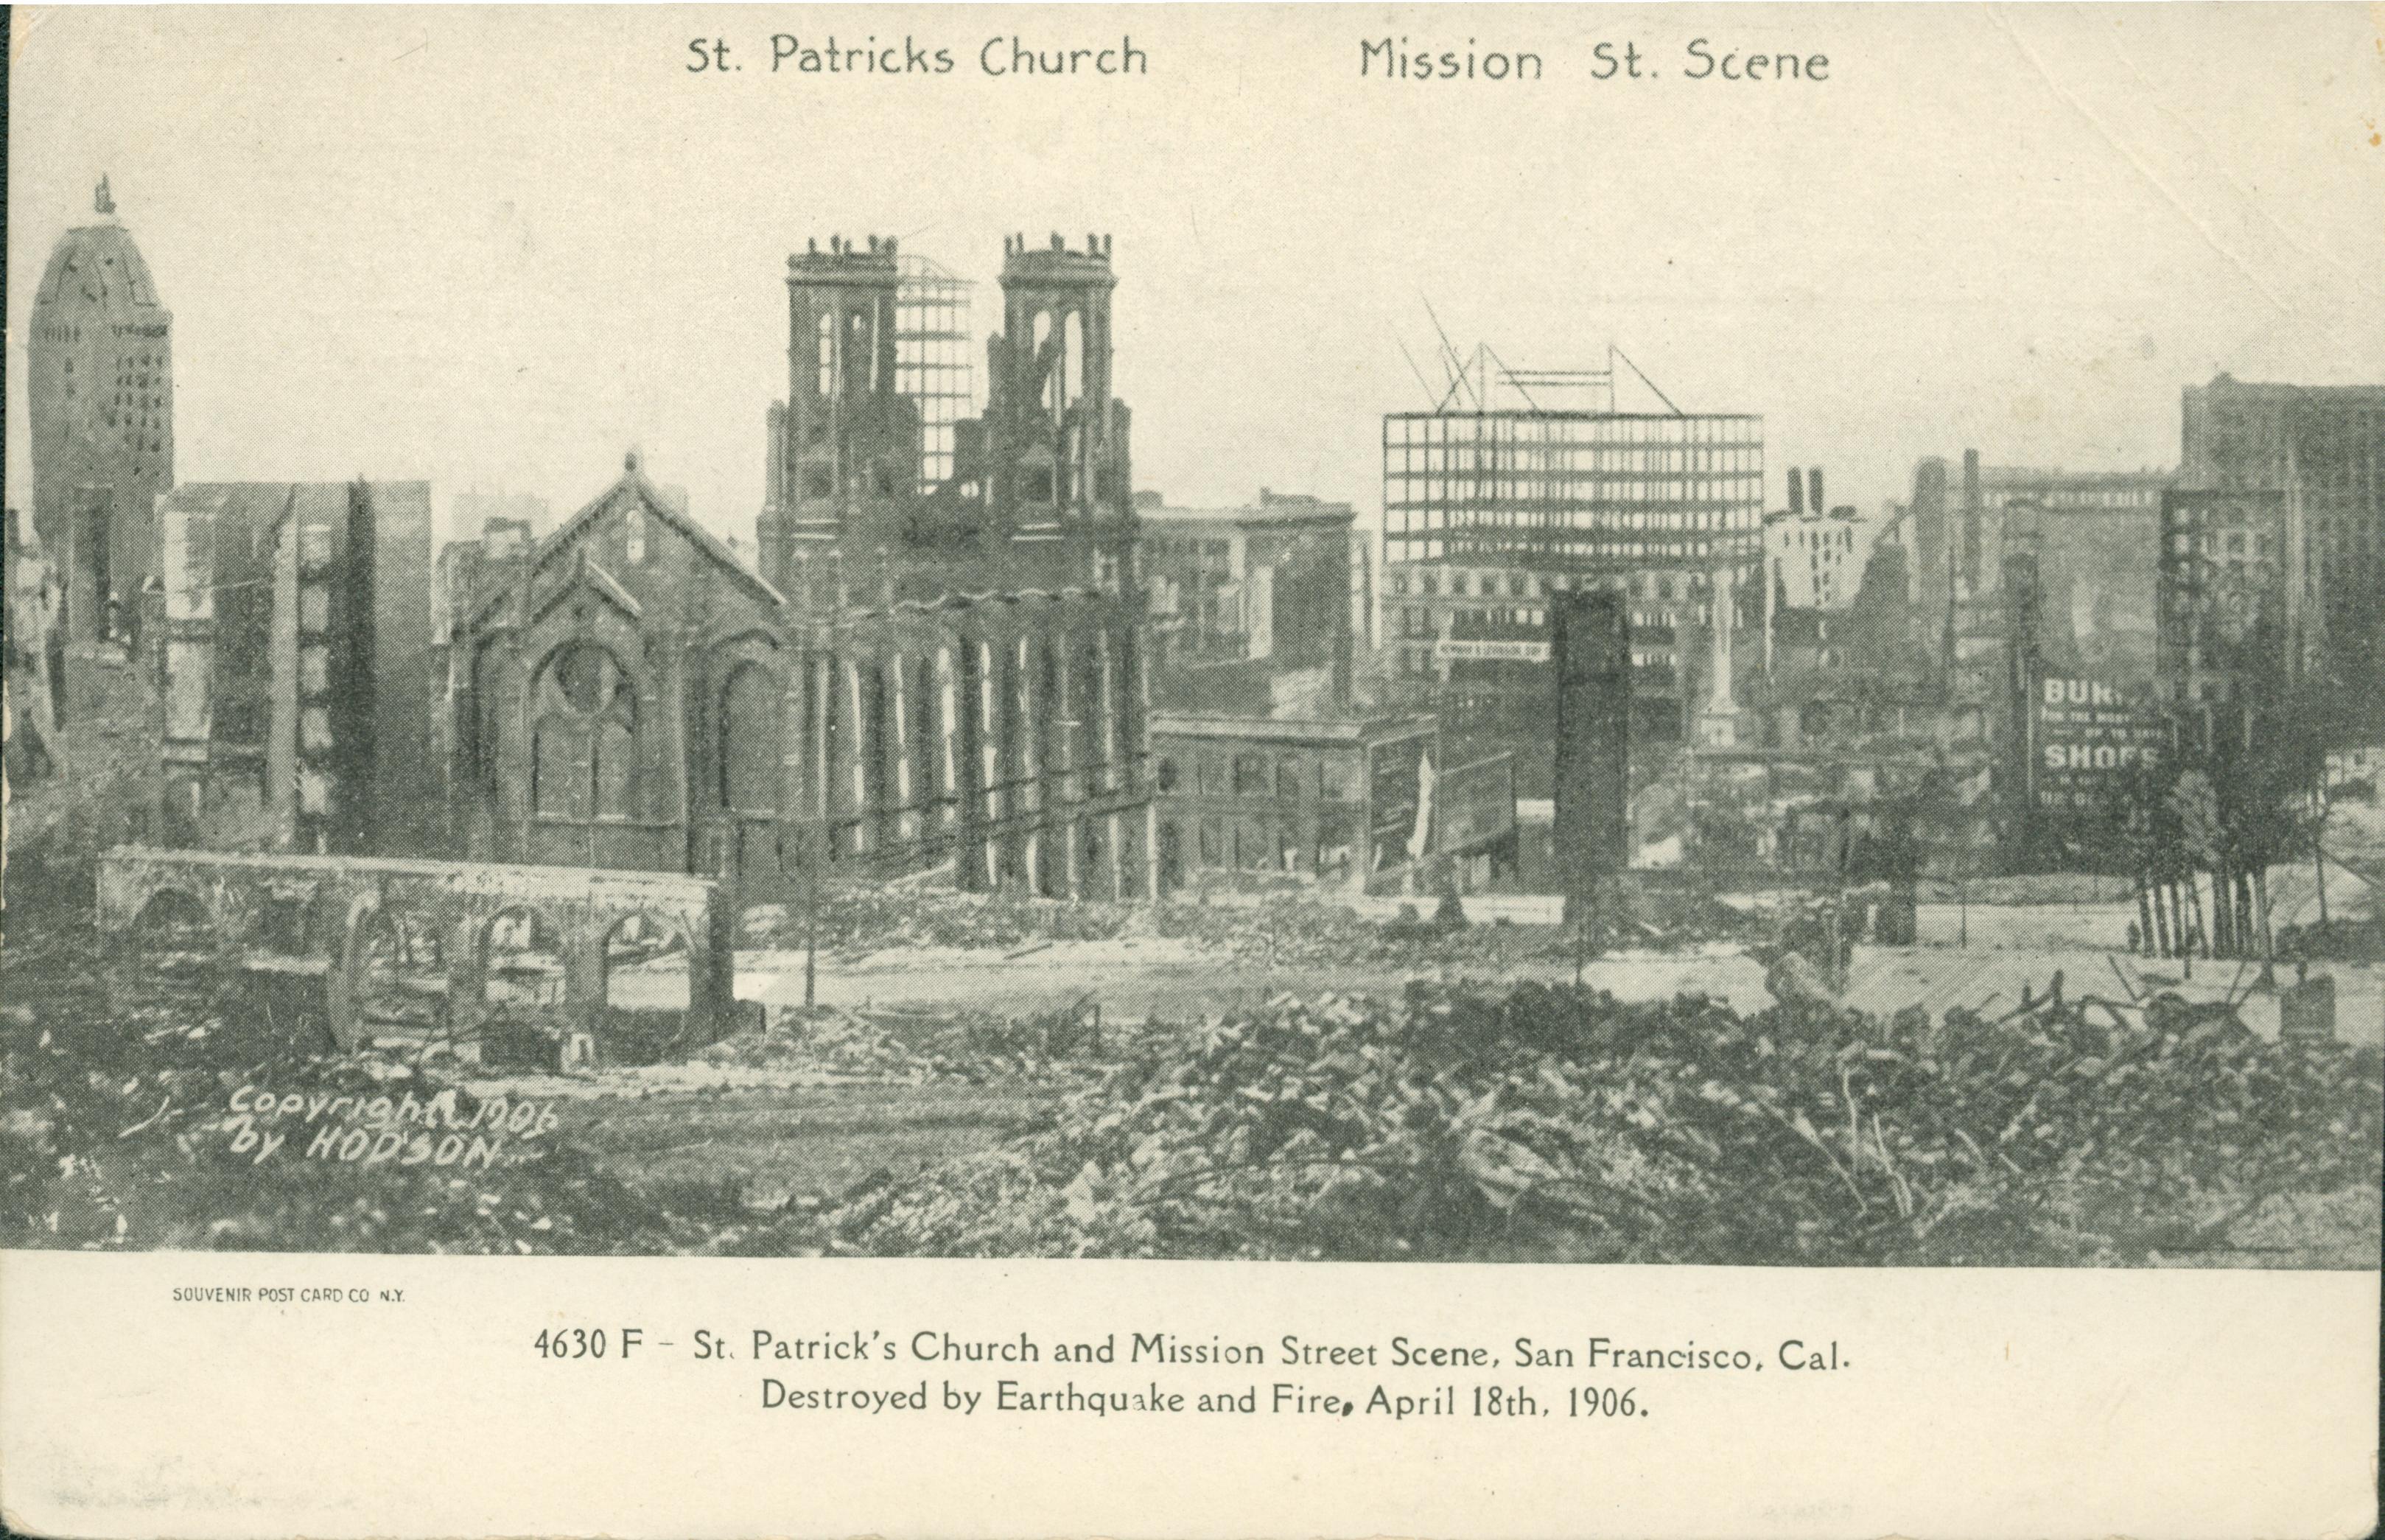 Shows the destruction of St. Patrick's Church and Mission Street San Francisco.